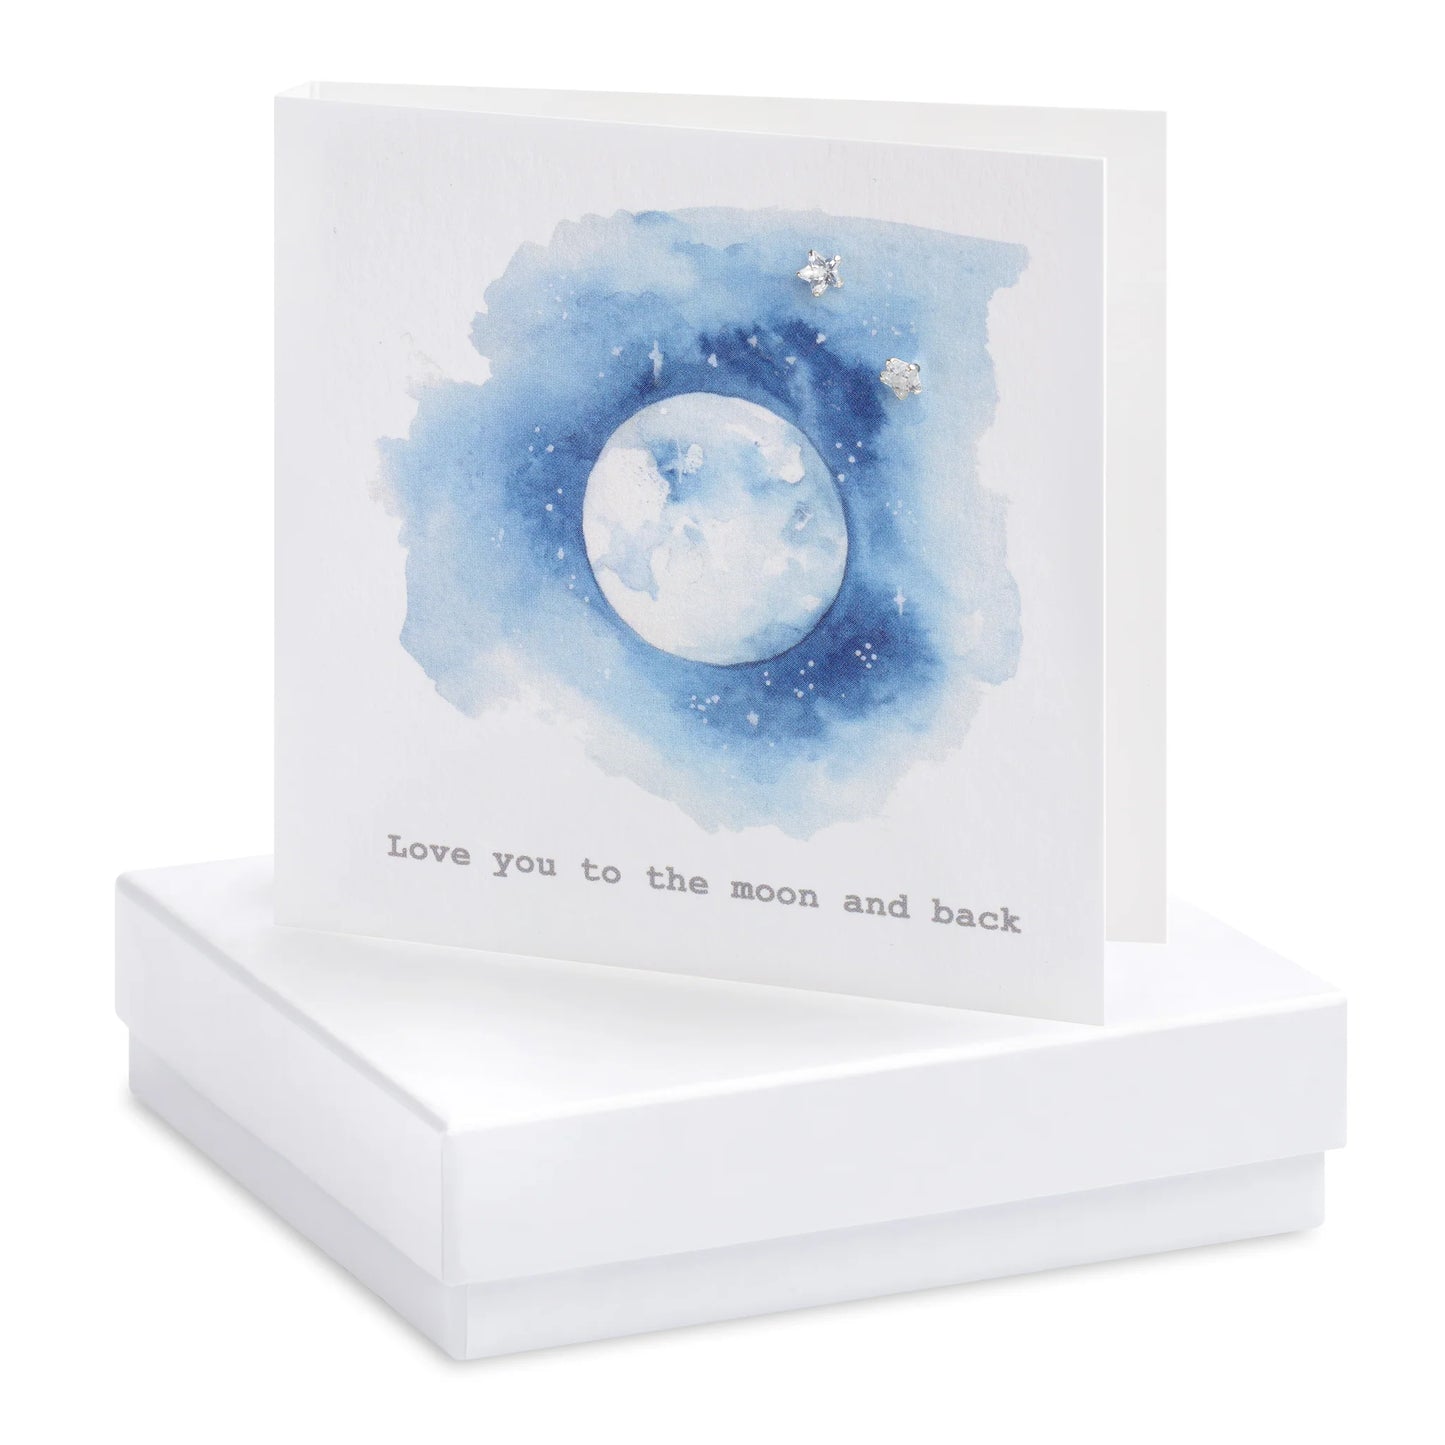 Boxed Earring Card - Love you to the moon and back